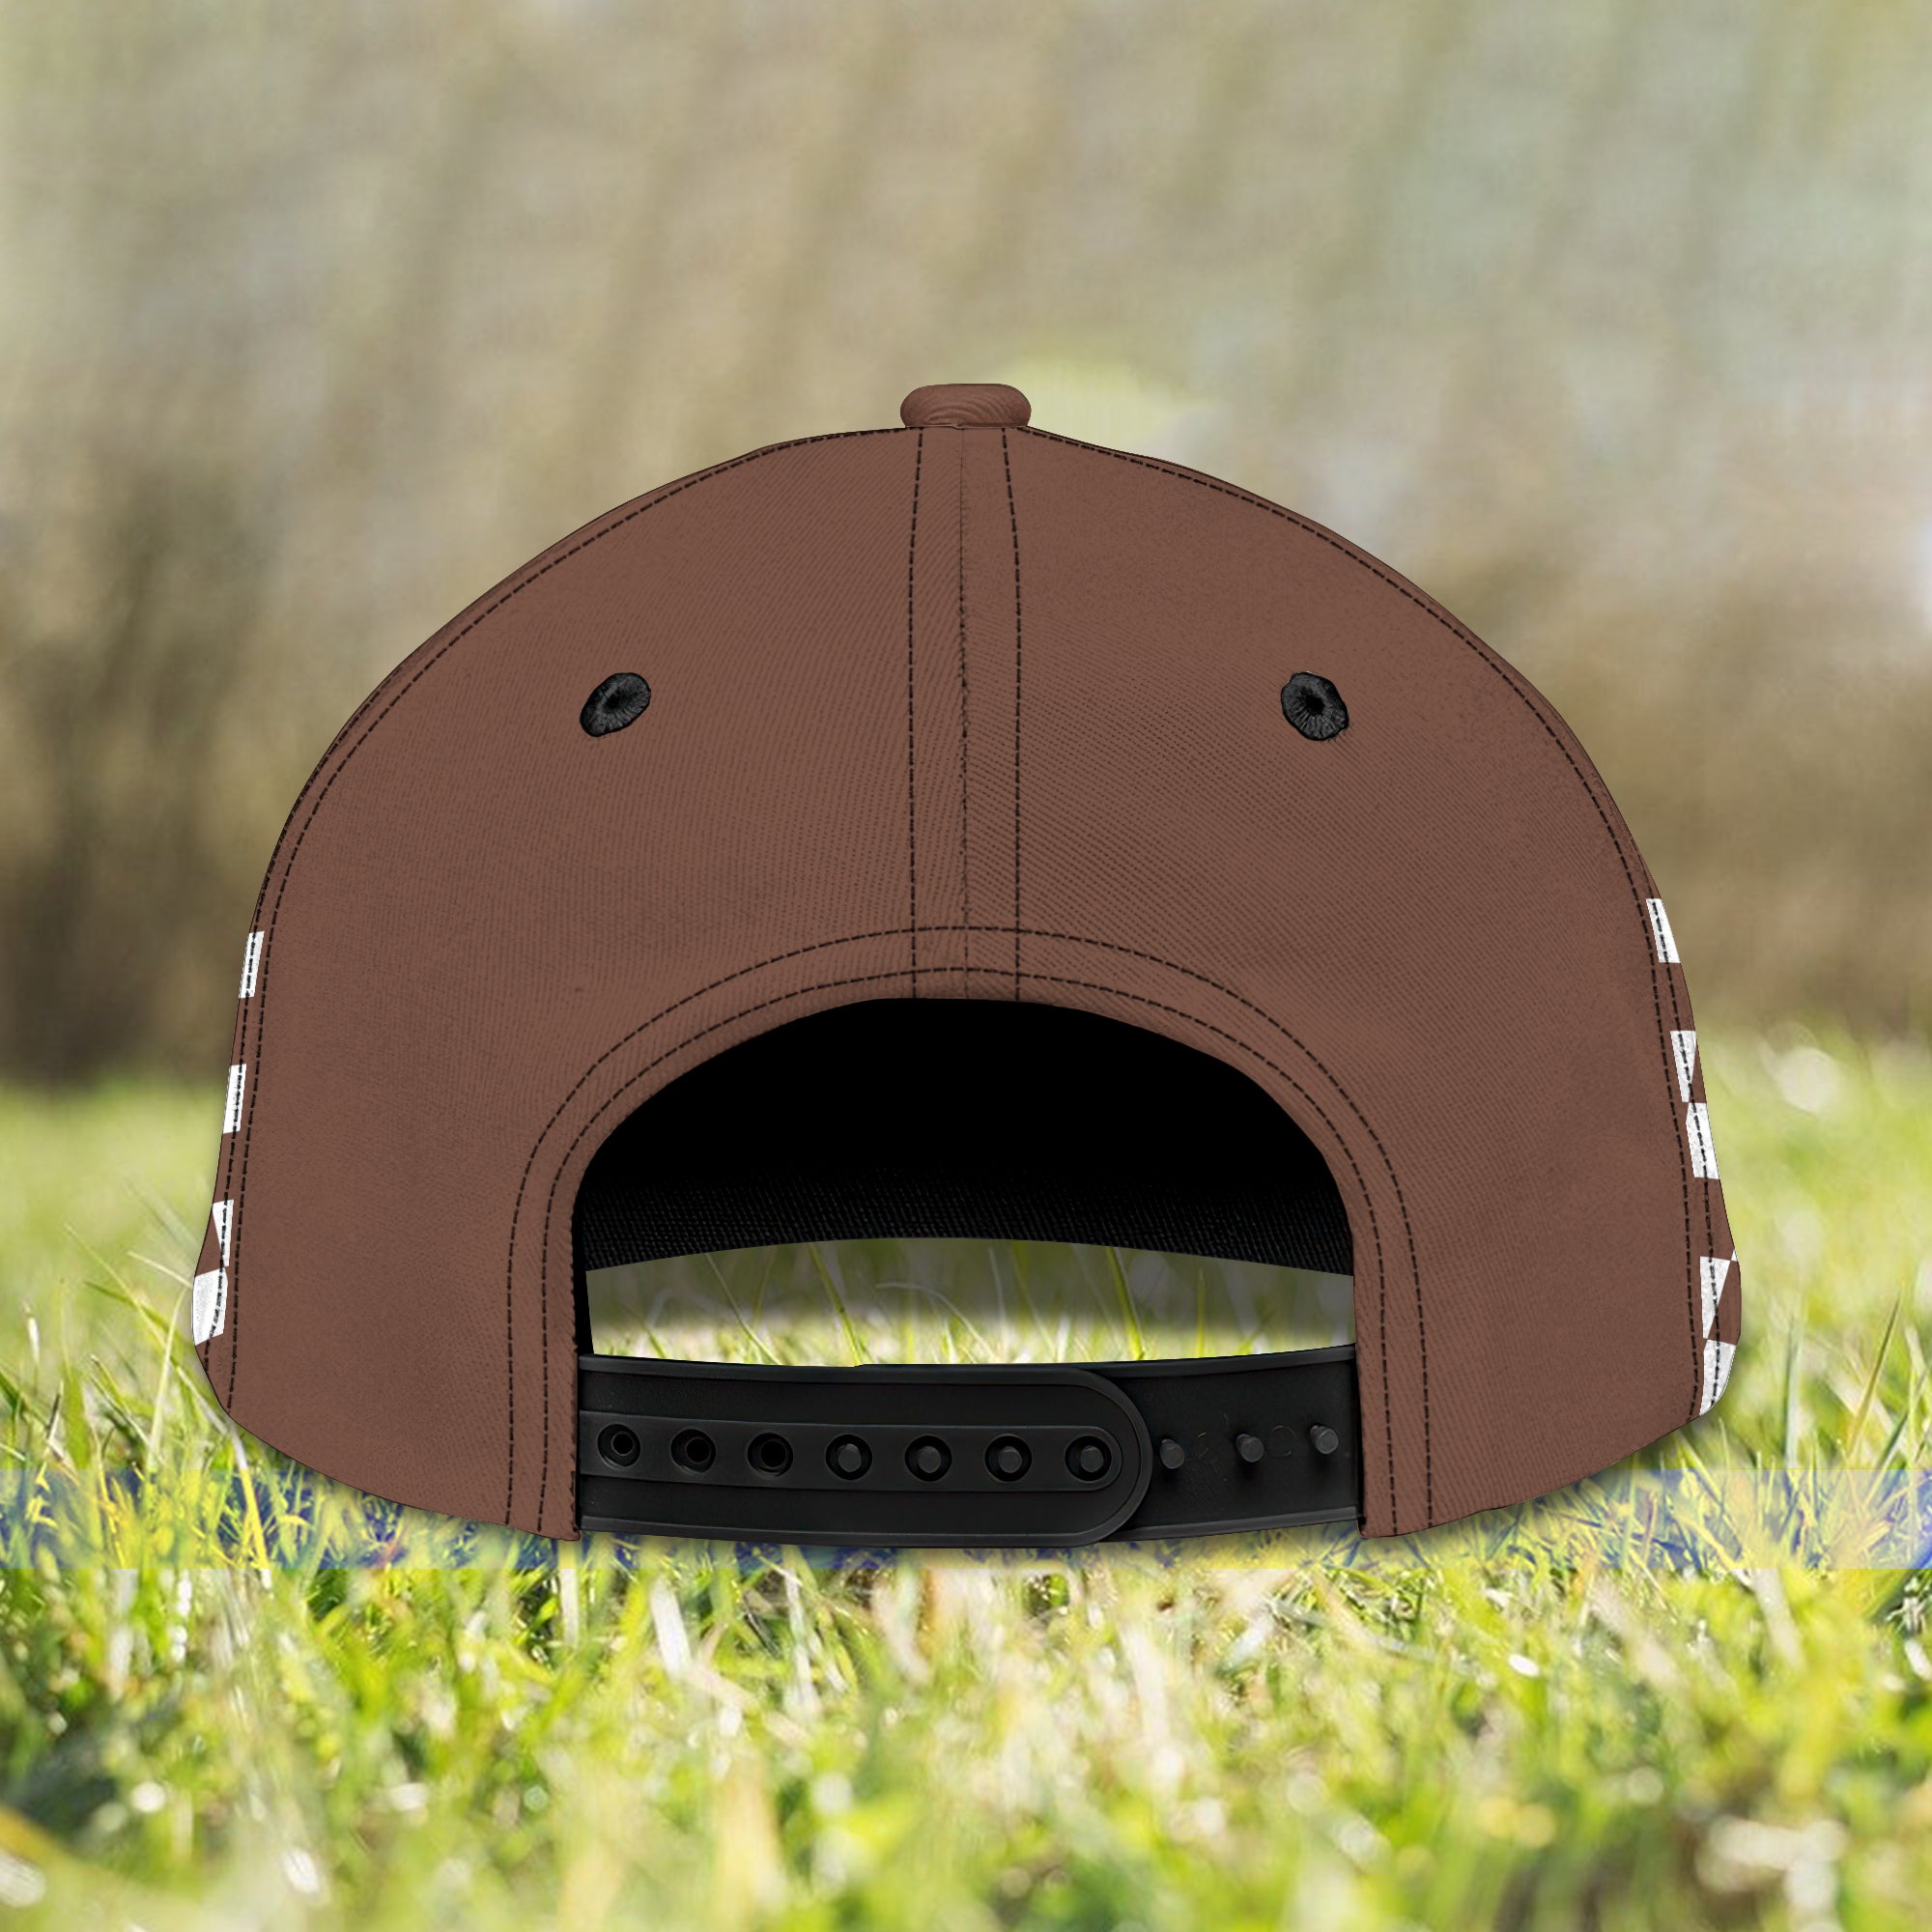 Horse Riding- Personalized Name Cap -Loop- Hd98 30